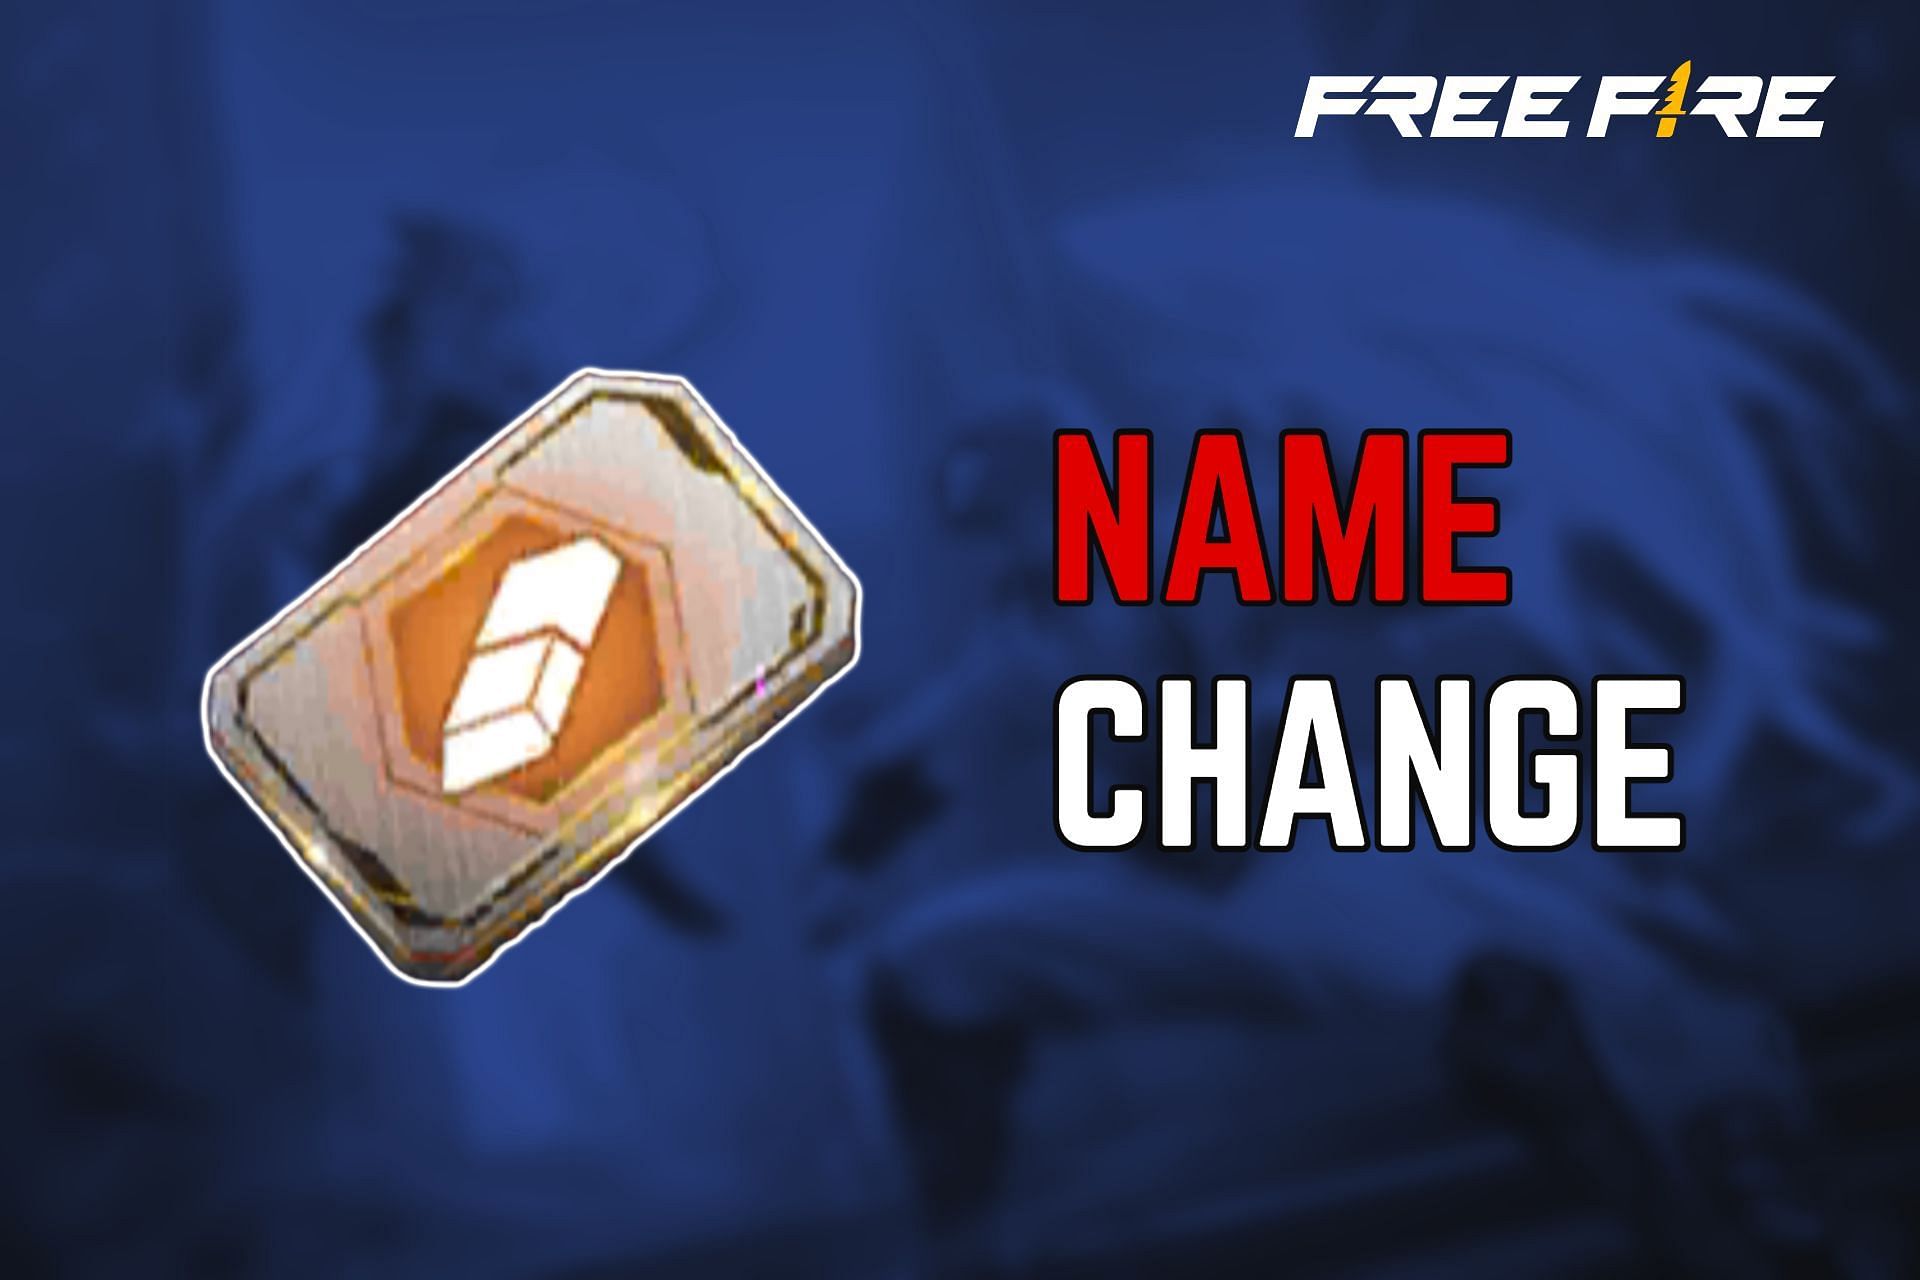 Guide on buying and using Name Change Card in Free Fire (Image via Sportskeeda)